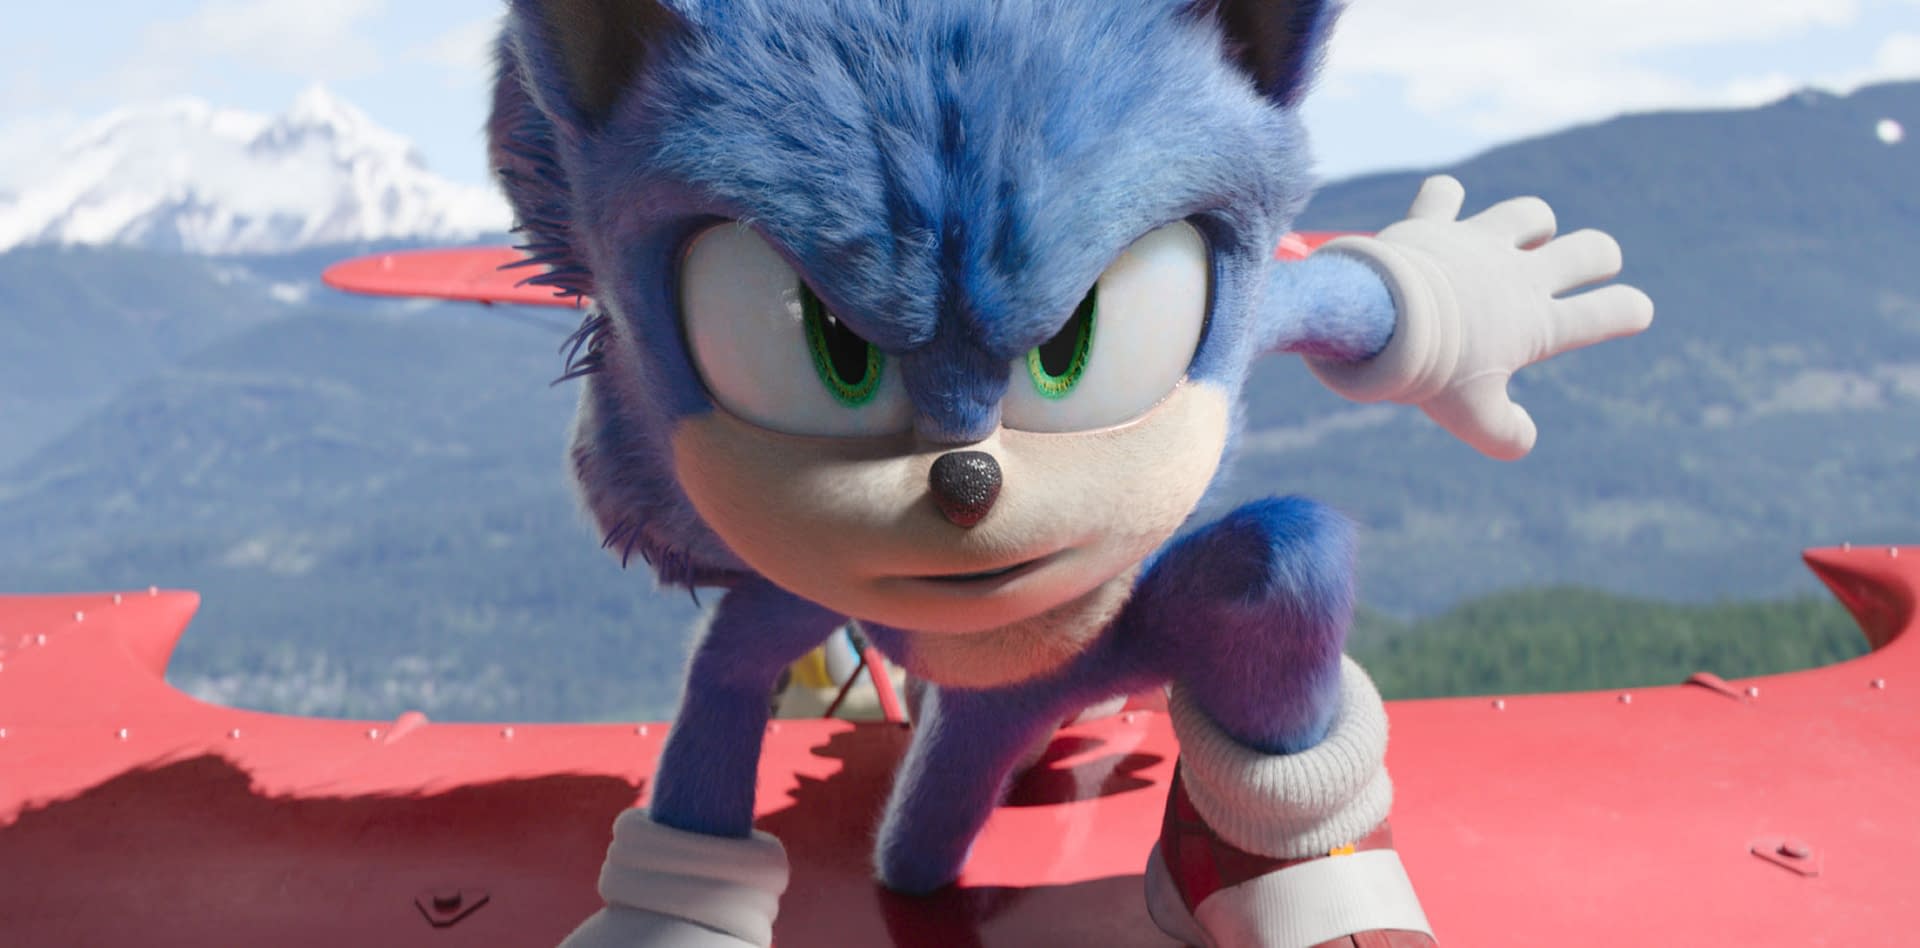 Sonic the Hedgehog on X: Our incredible cast and filmmakers took